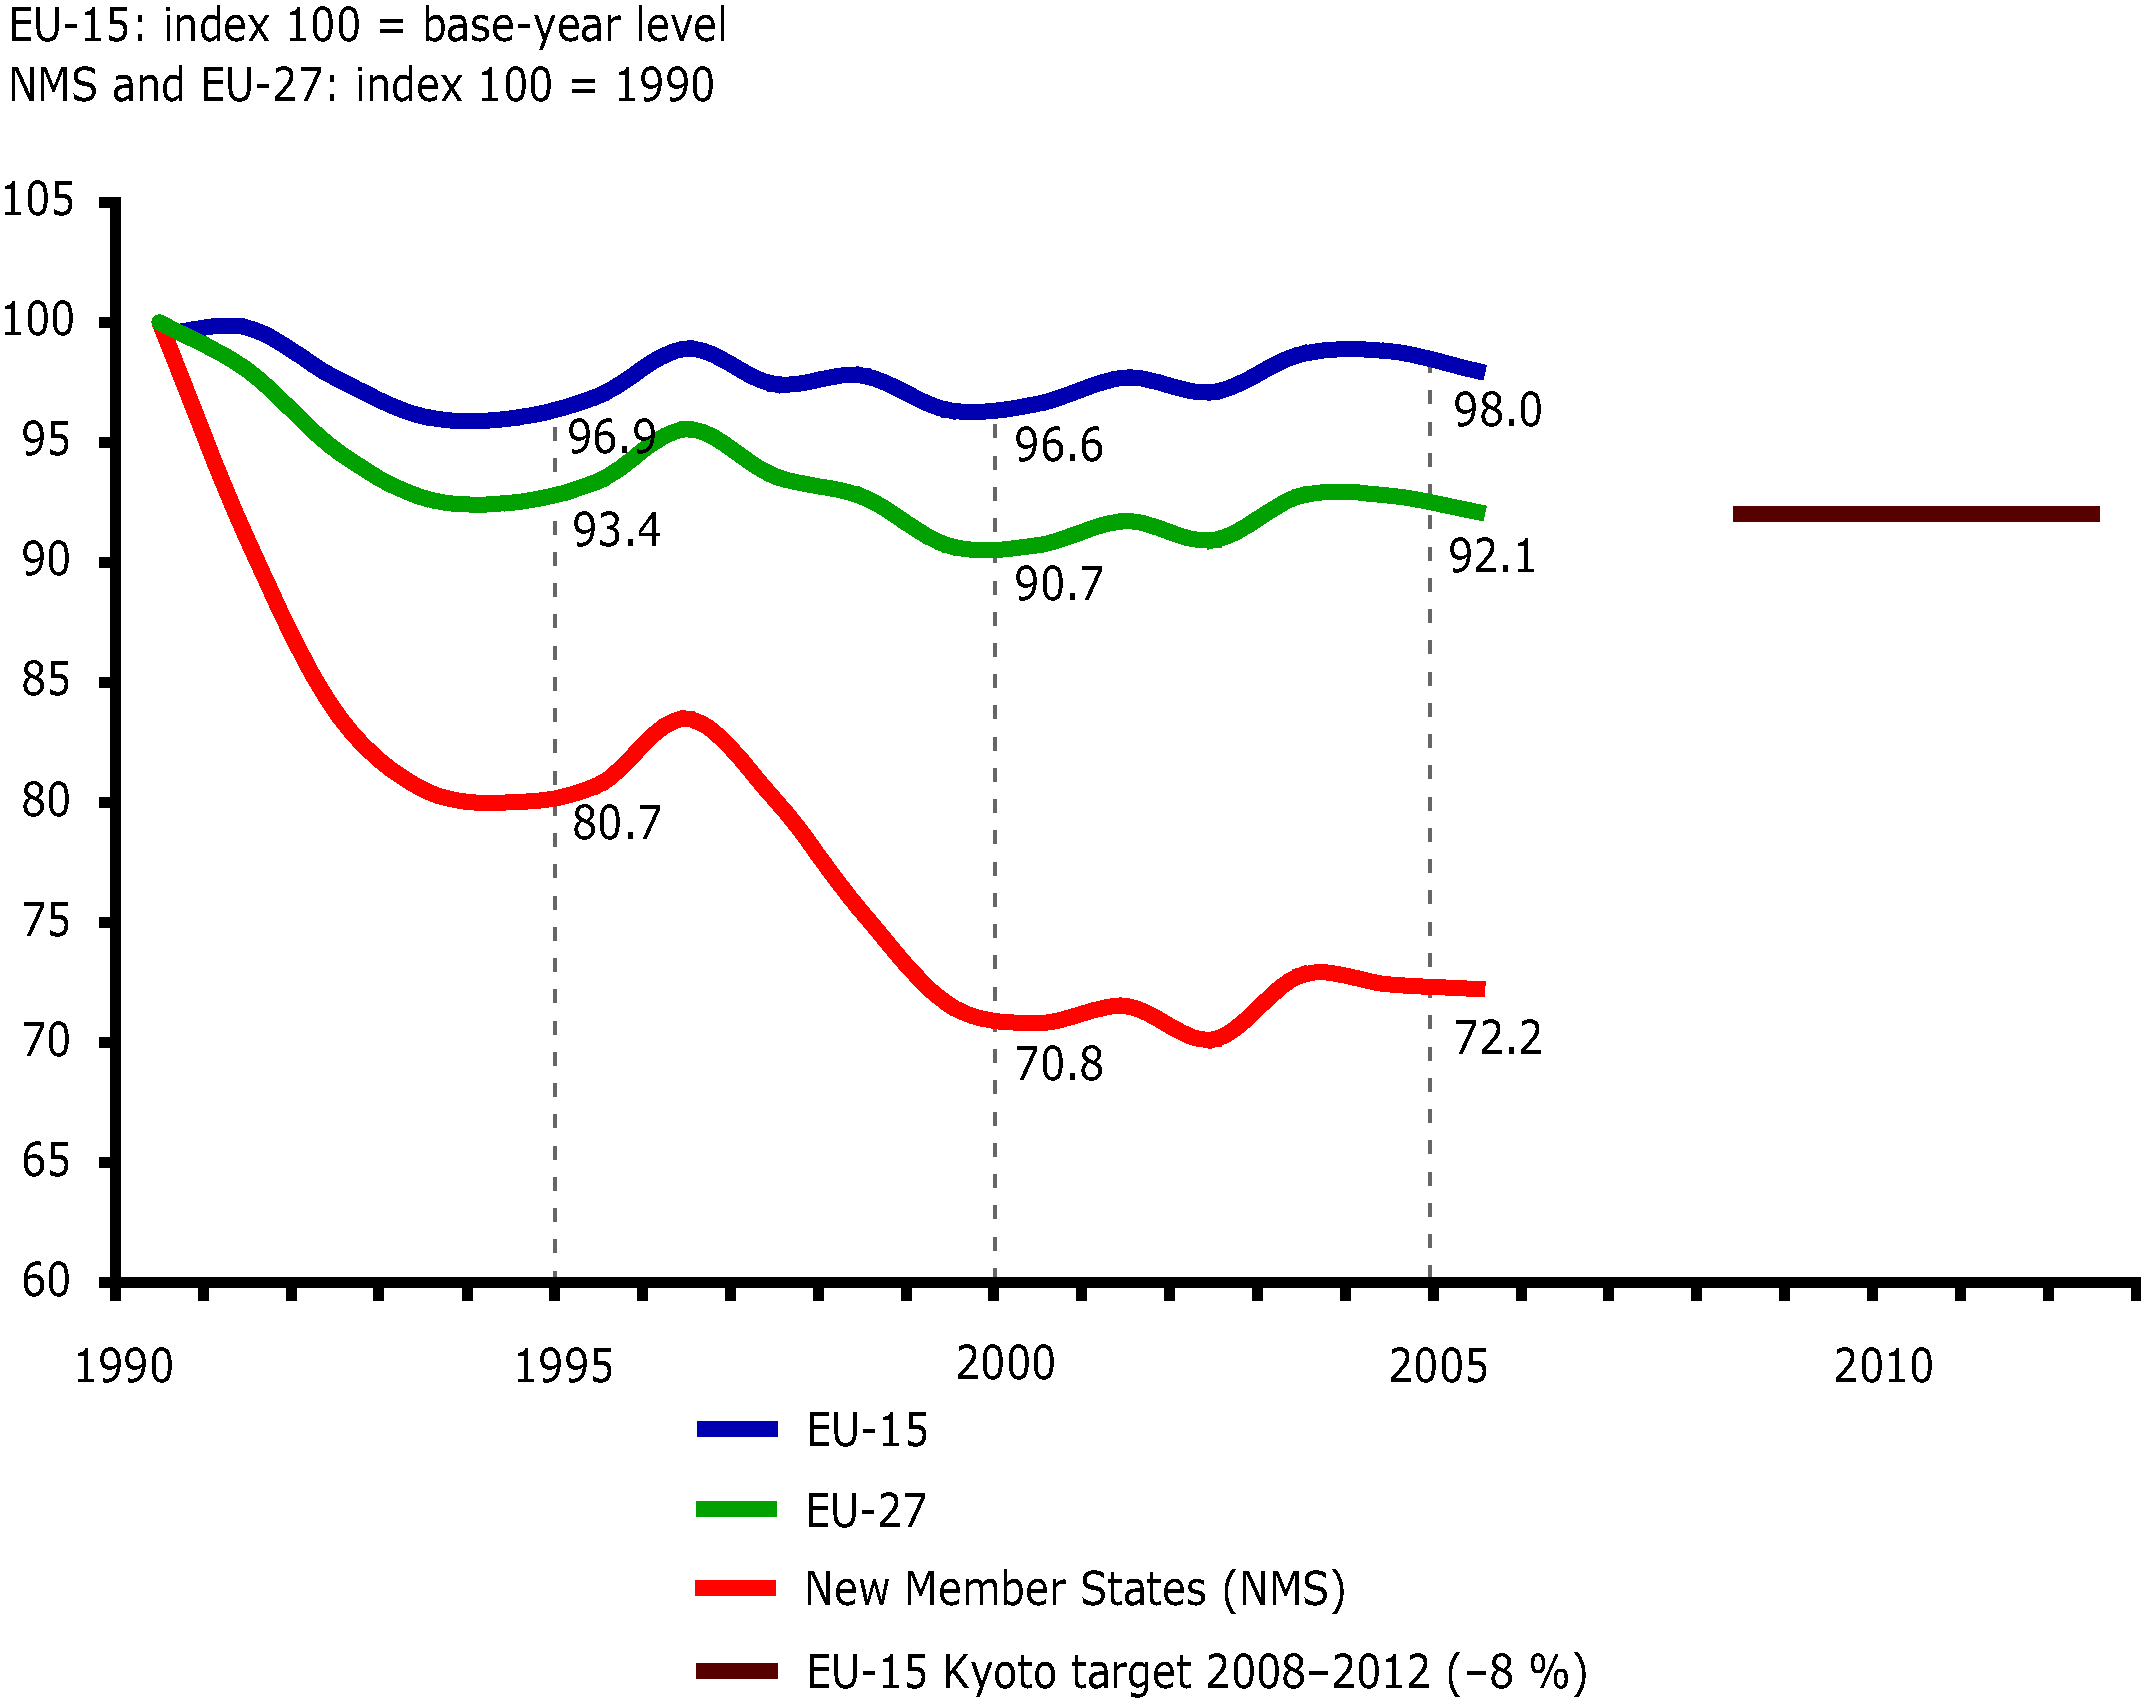 Greenhouse gas emissions in the EU-27, the EU-15 and in new Member States, 1990-2005, index 100 = base year level (EU-15) or 1990 levels (EU-27, new Member States)